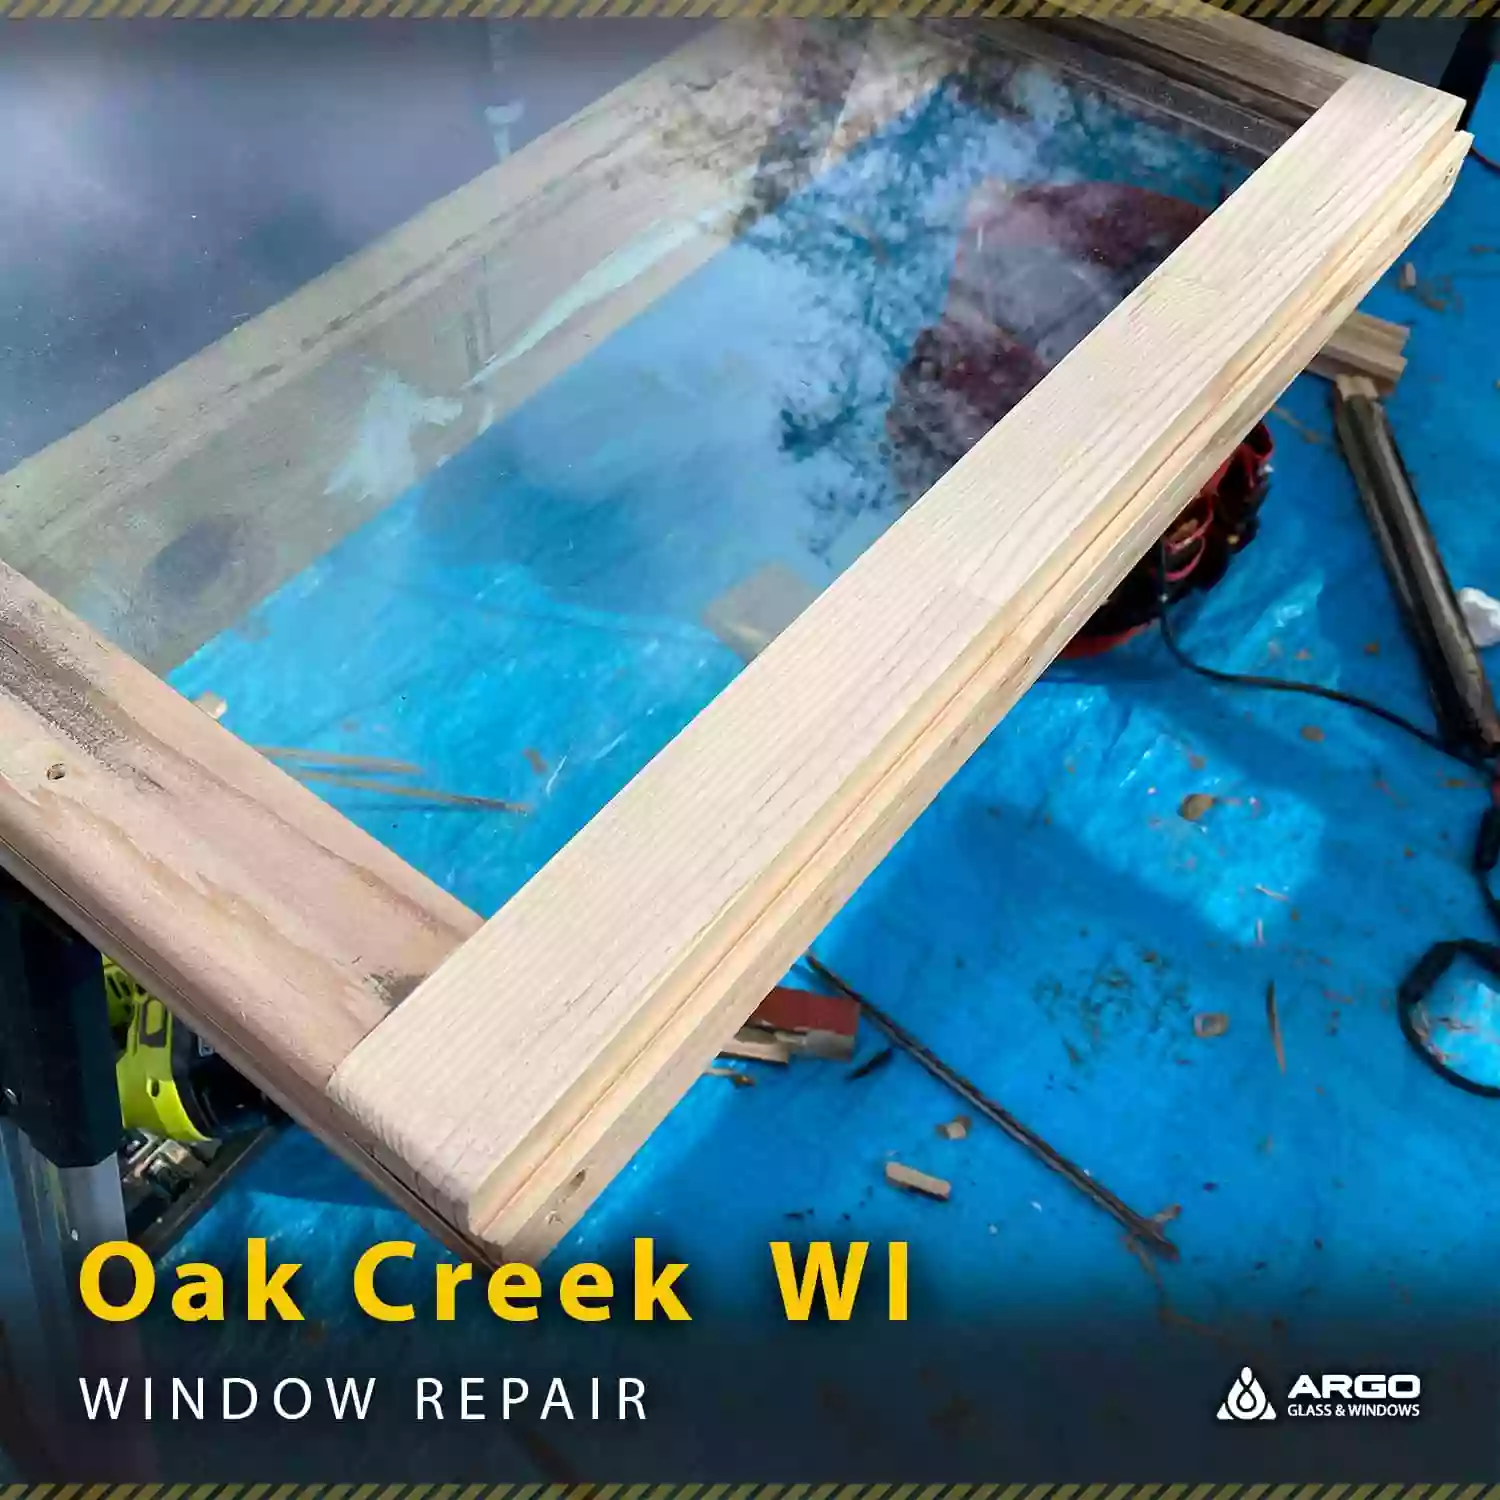 Window Repair & Glass Replacement Company